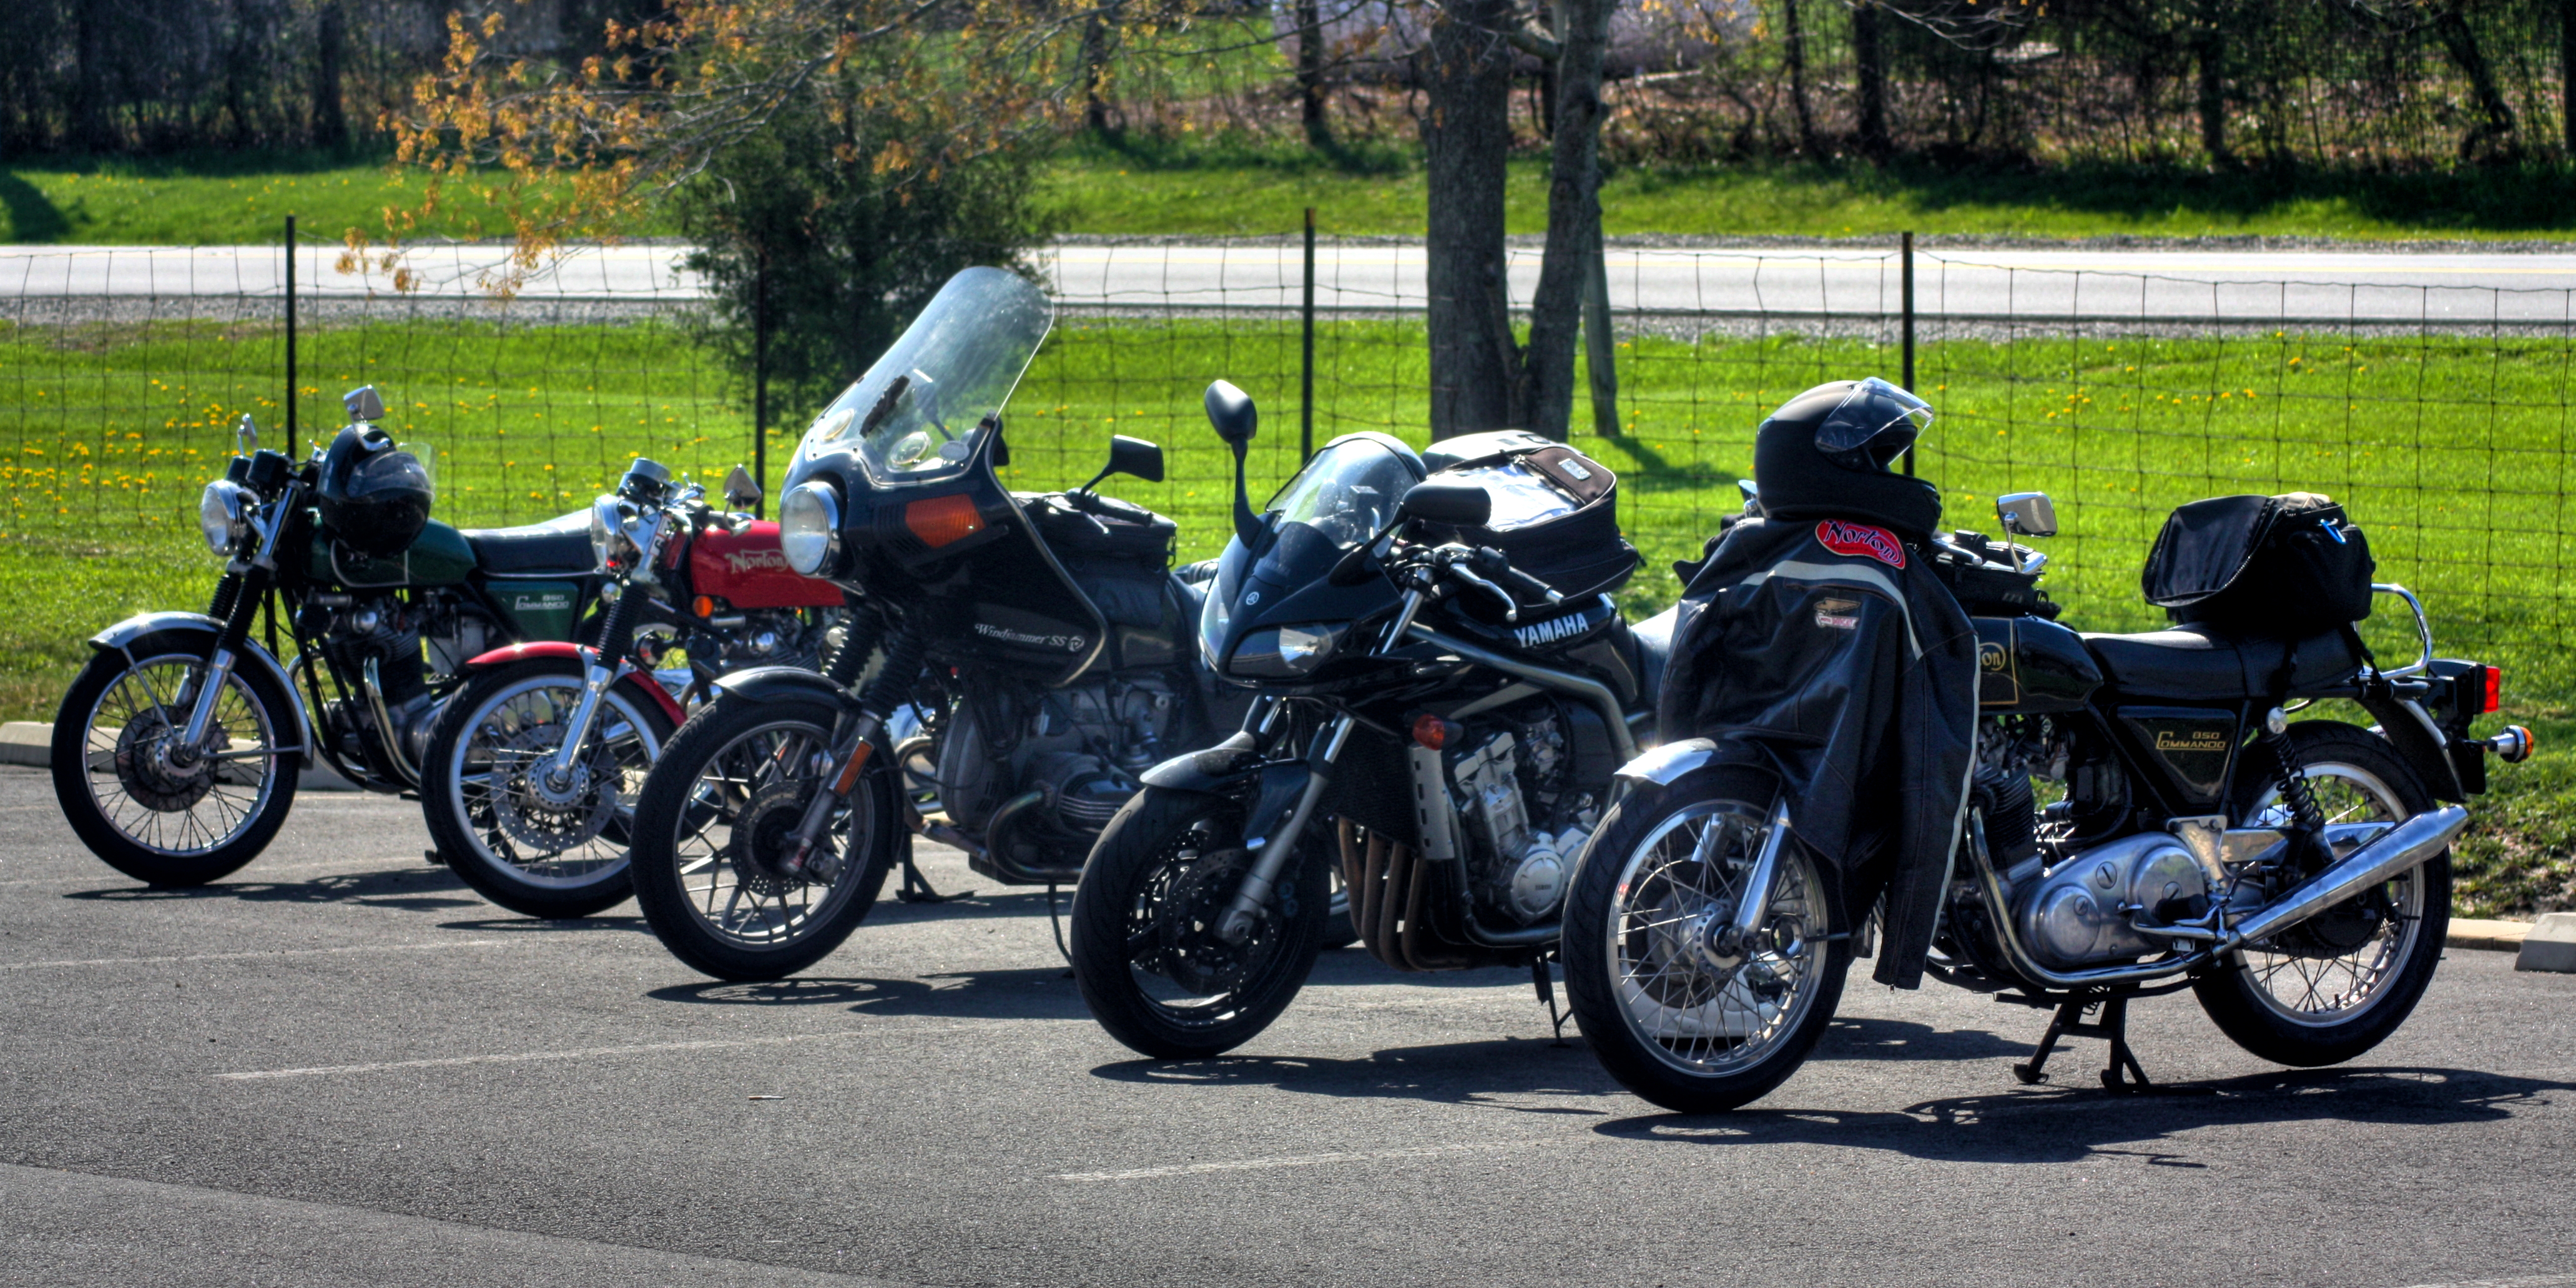 Vintage Motorcycles on Display at the PVR 2011 Road Ride | Flickr ...